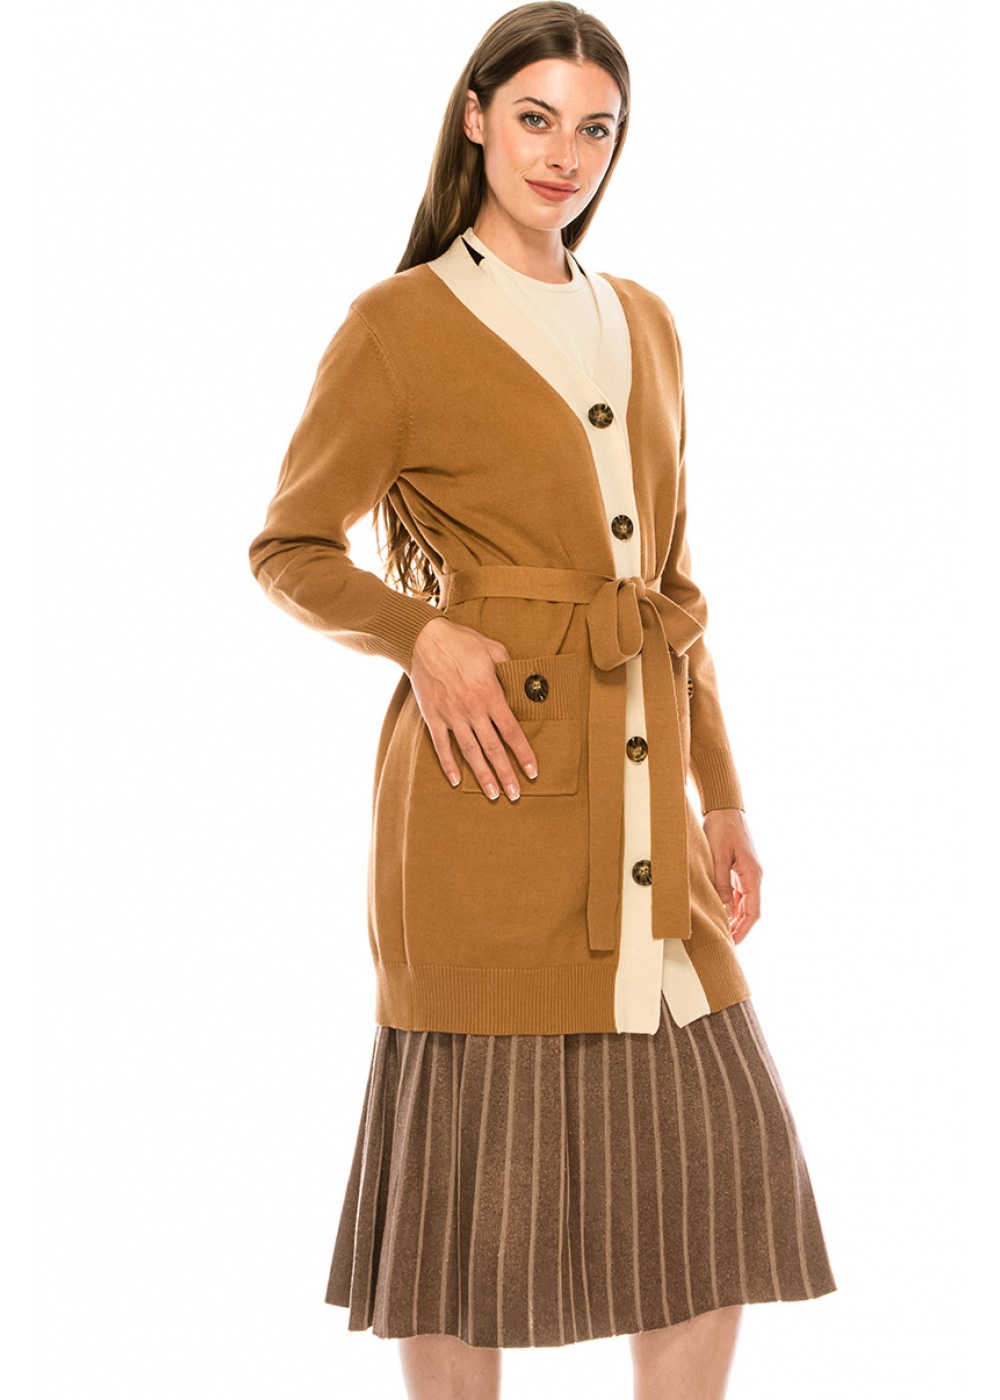 Elongated cardigan with pockets and belt